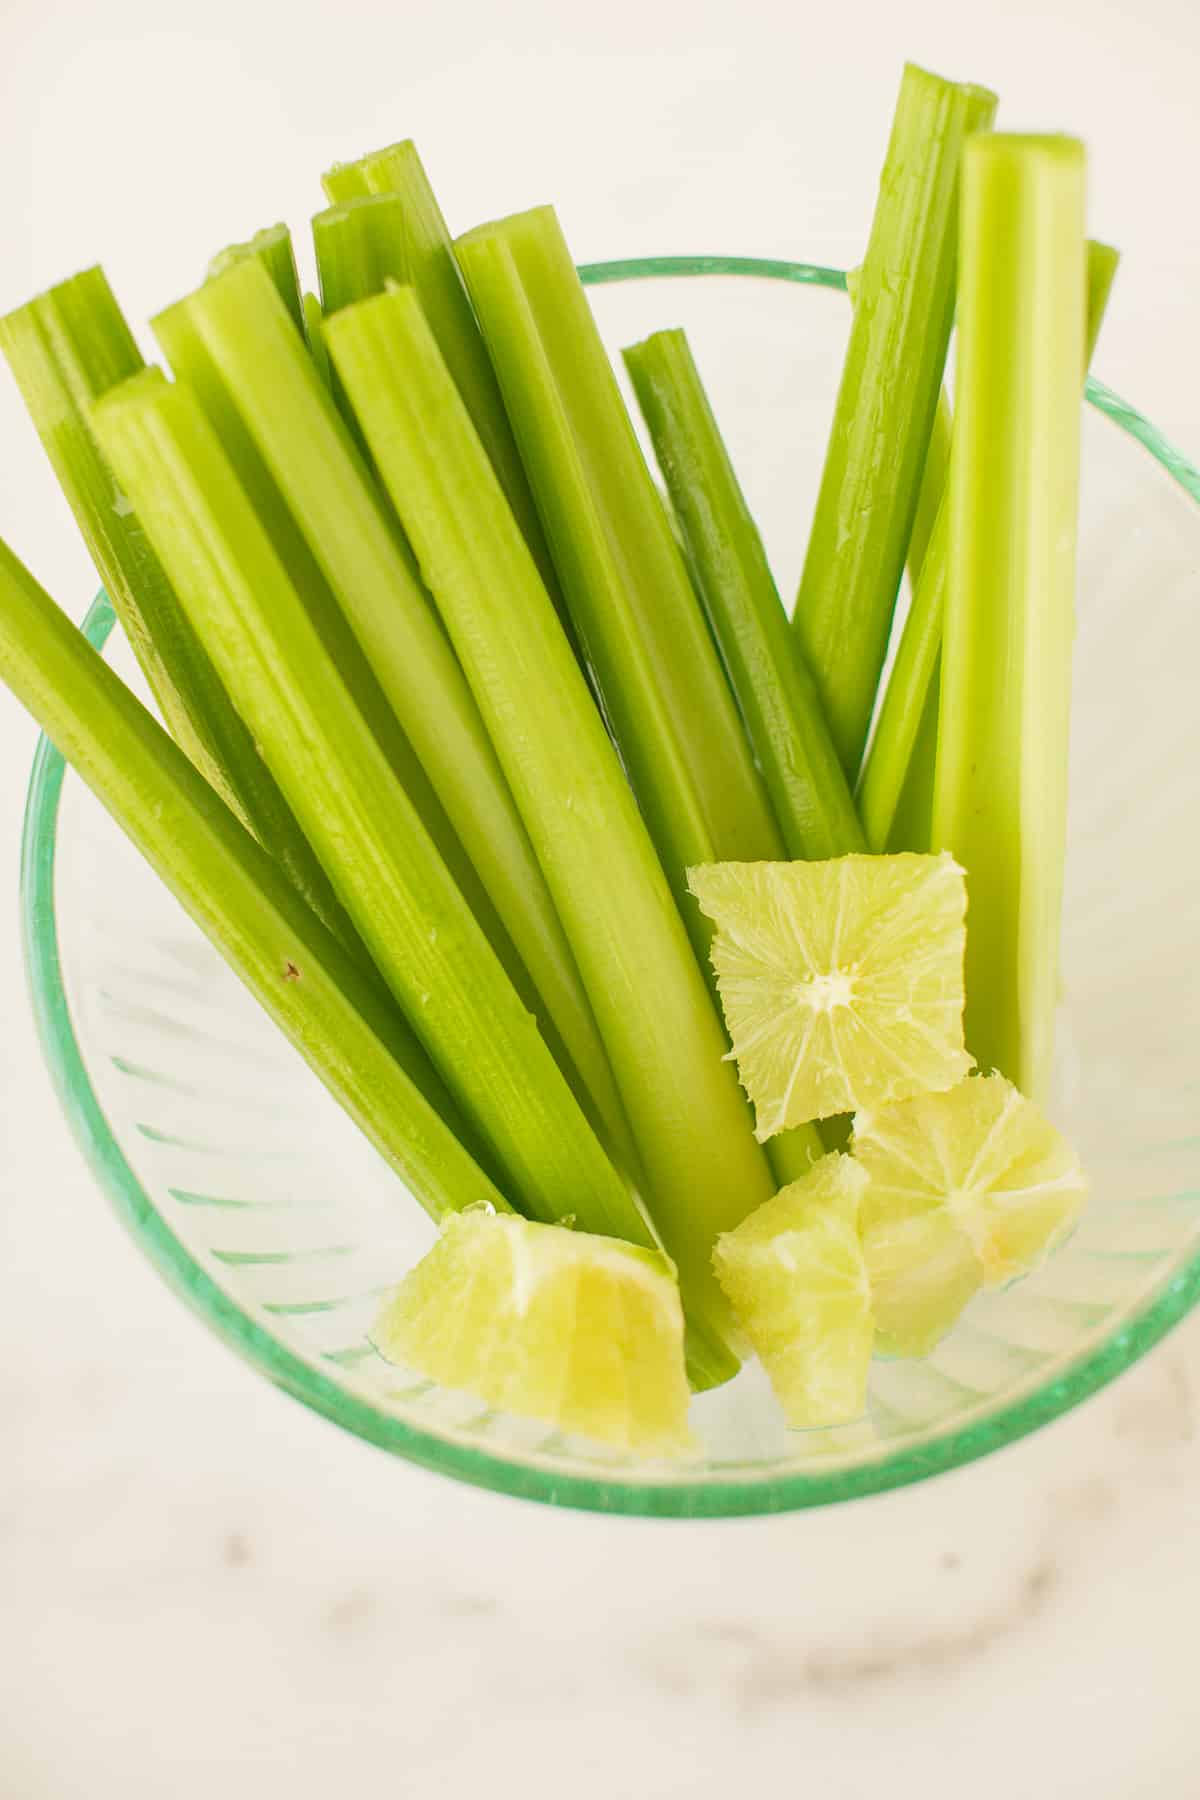 How To Make Celery Juice in a Food Processor